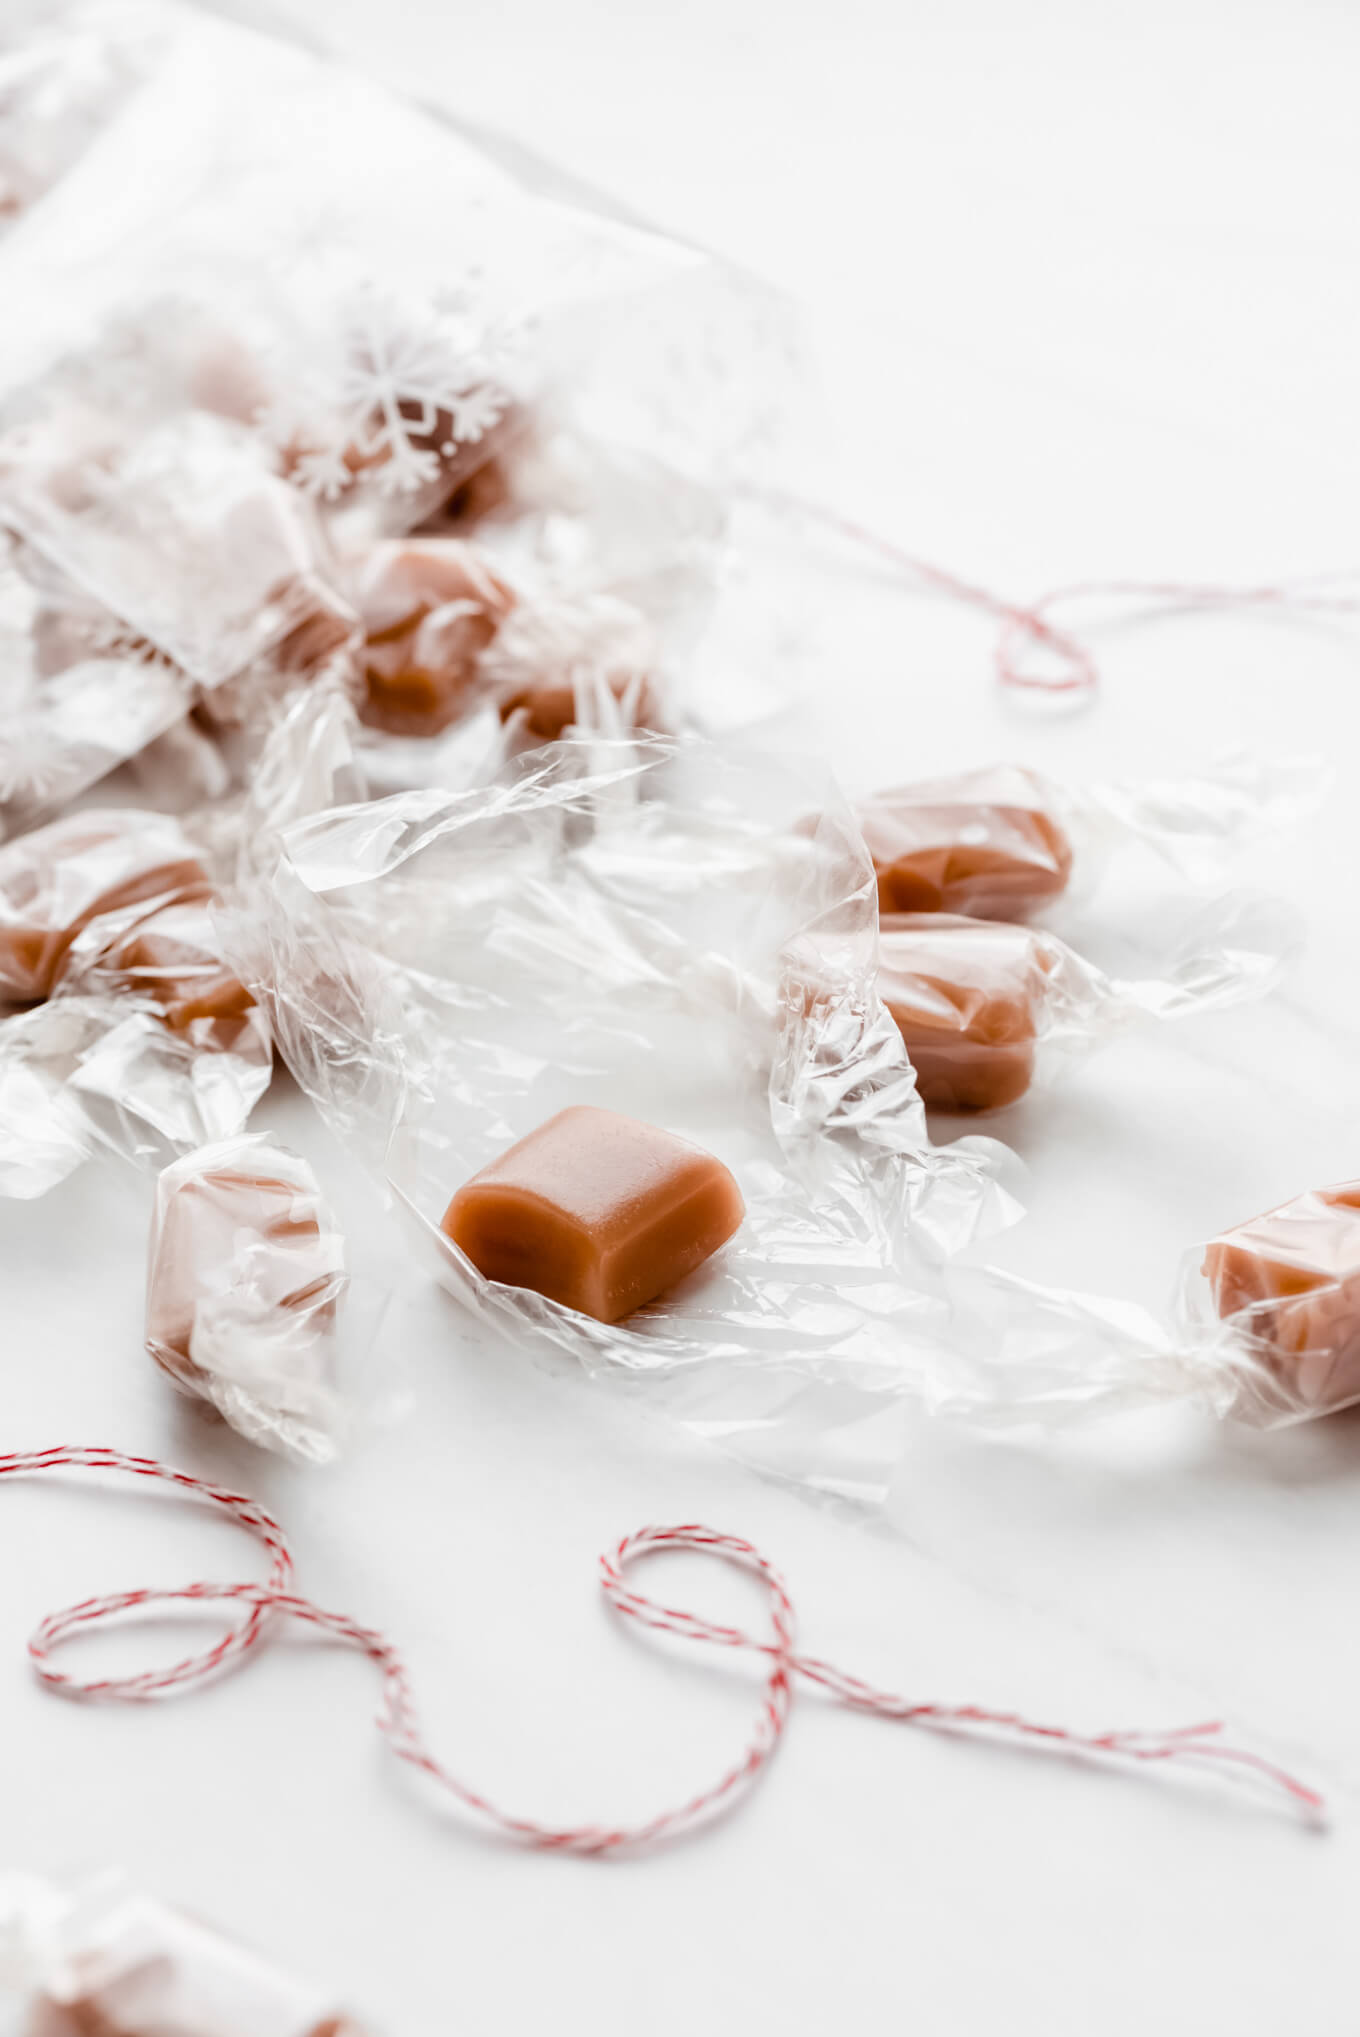 Caramels spilling out of a cellophane bag onto the table and one unwrapped.